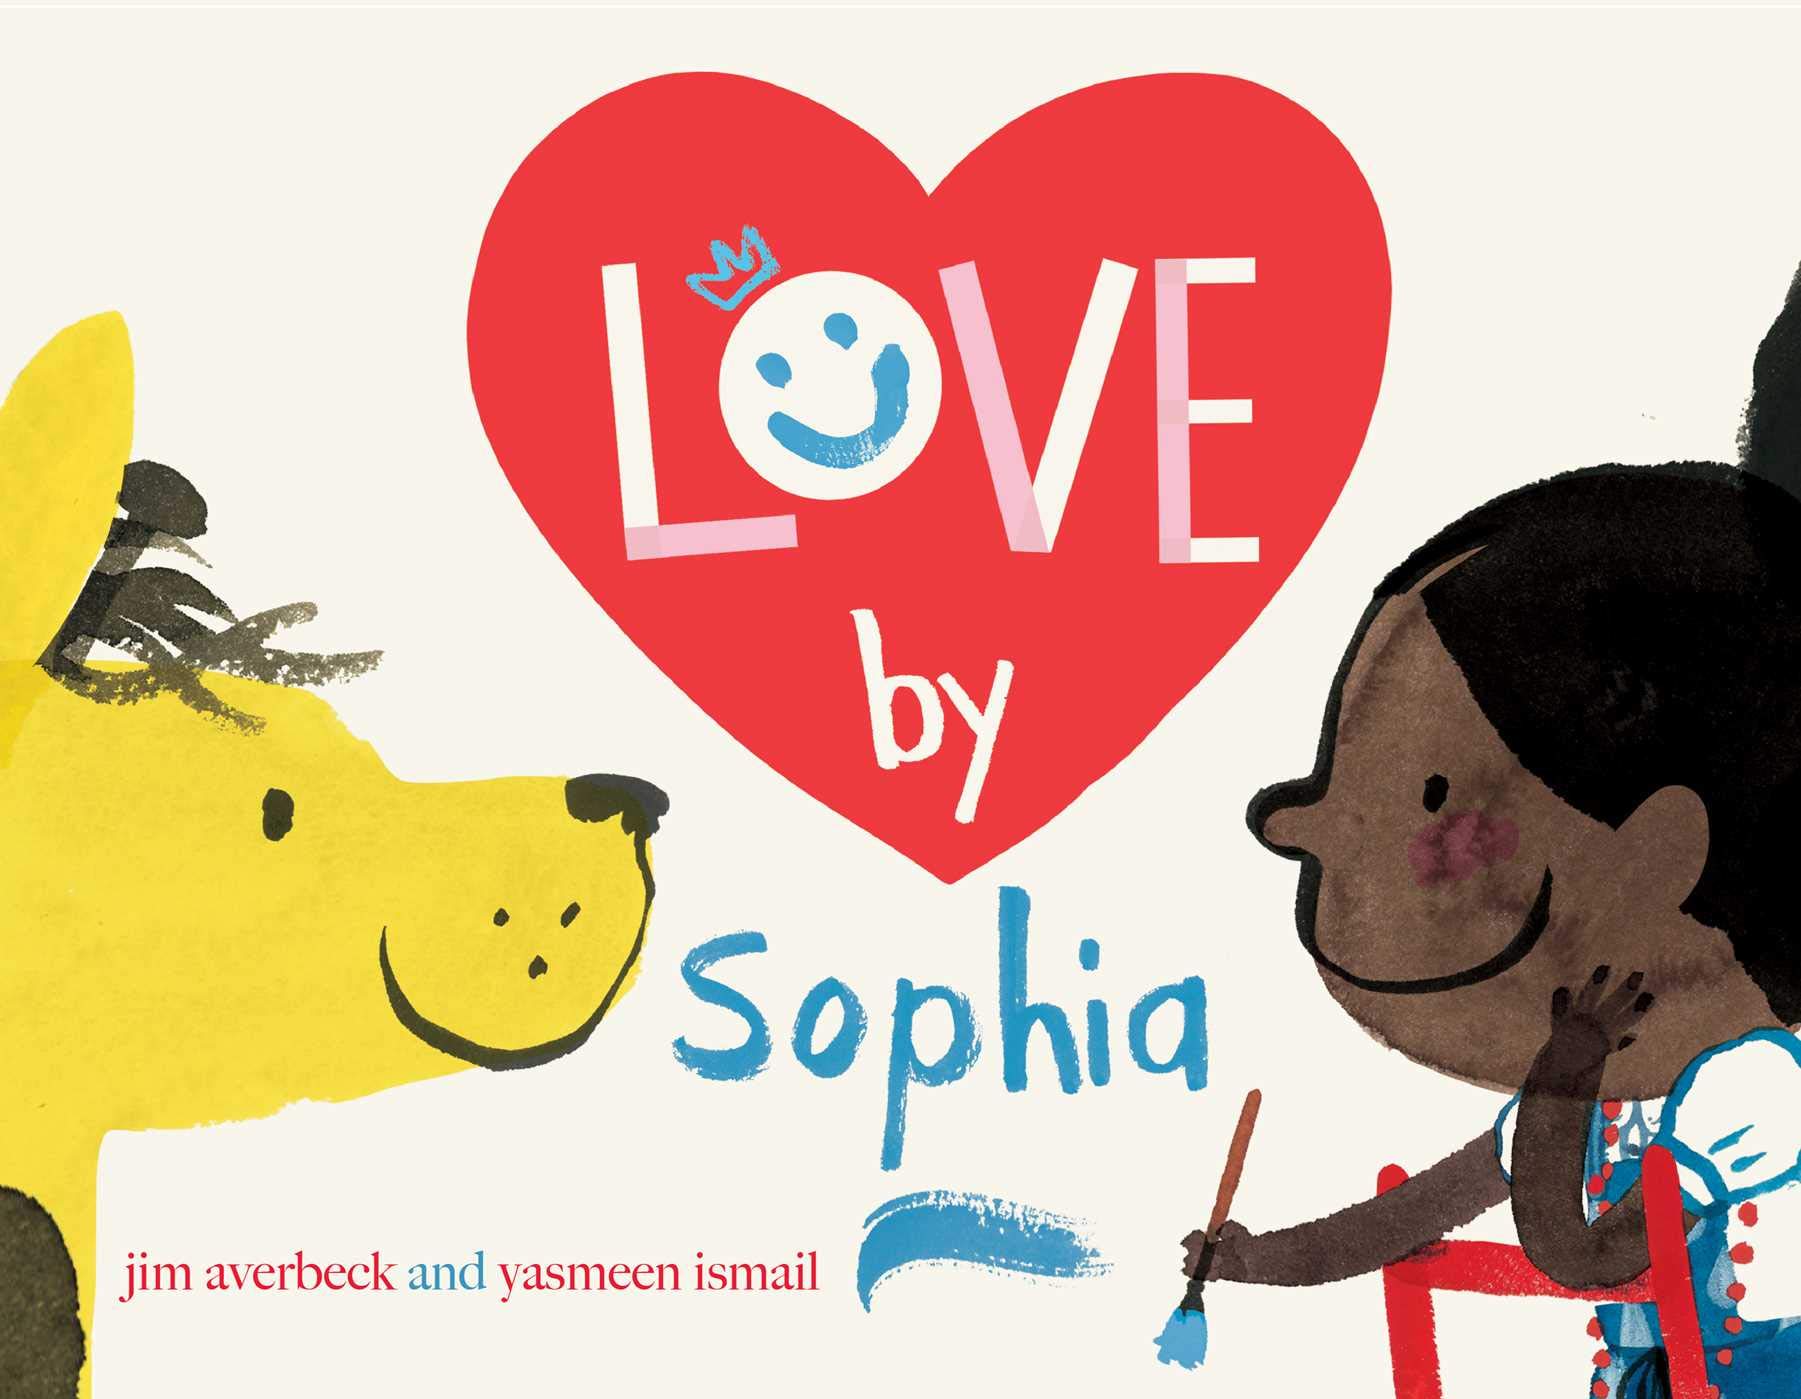 Image for "Love by Sophia"